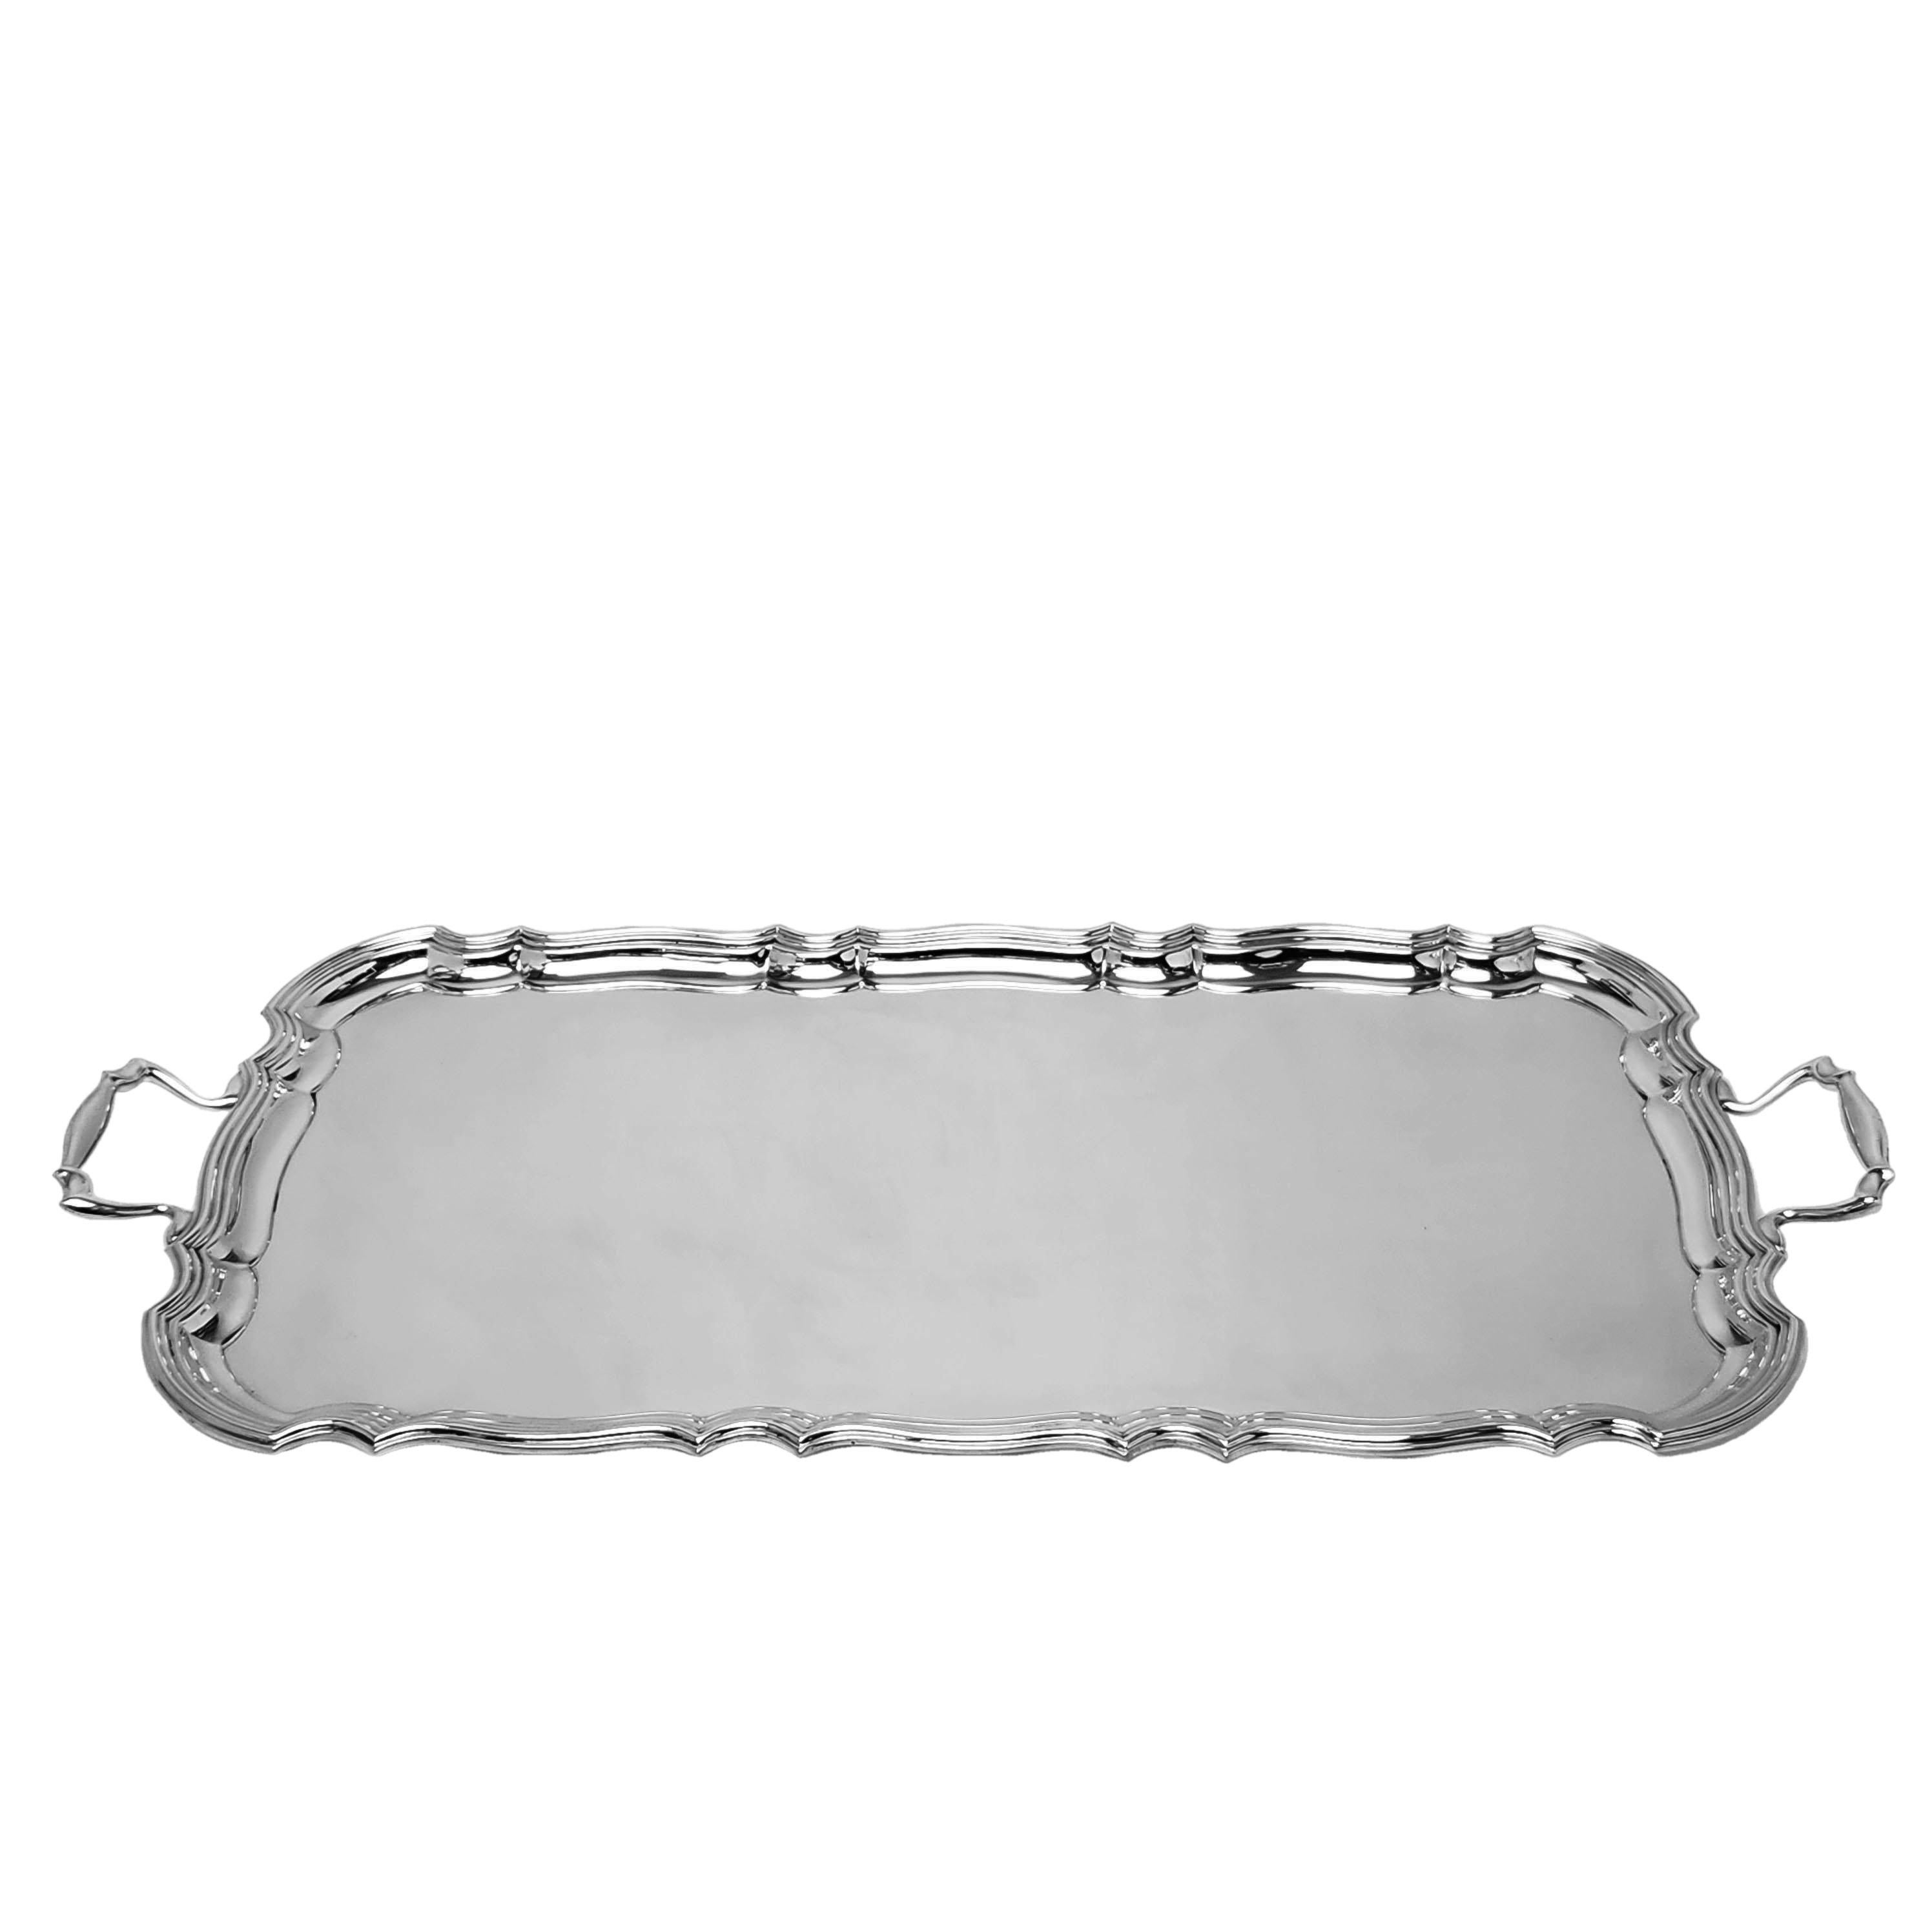 Am elegant Antique Sterling Silver Serving Tray with a Chippendale style border. This Two handled Tray is suitable as a Sandwich Tray but sizable enough for serving.

Made in Birmingham in 1915 by Barker Bros
 
Weight - 1642g / 52.8oz
Length incl